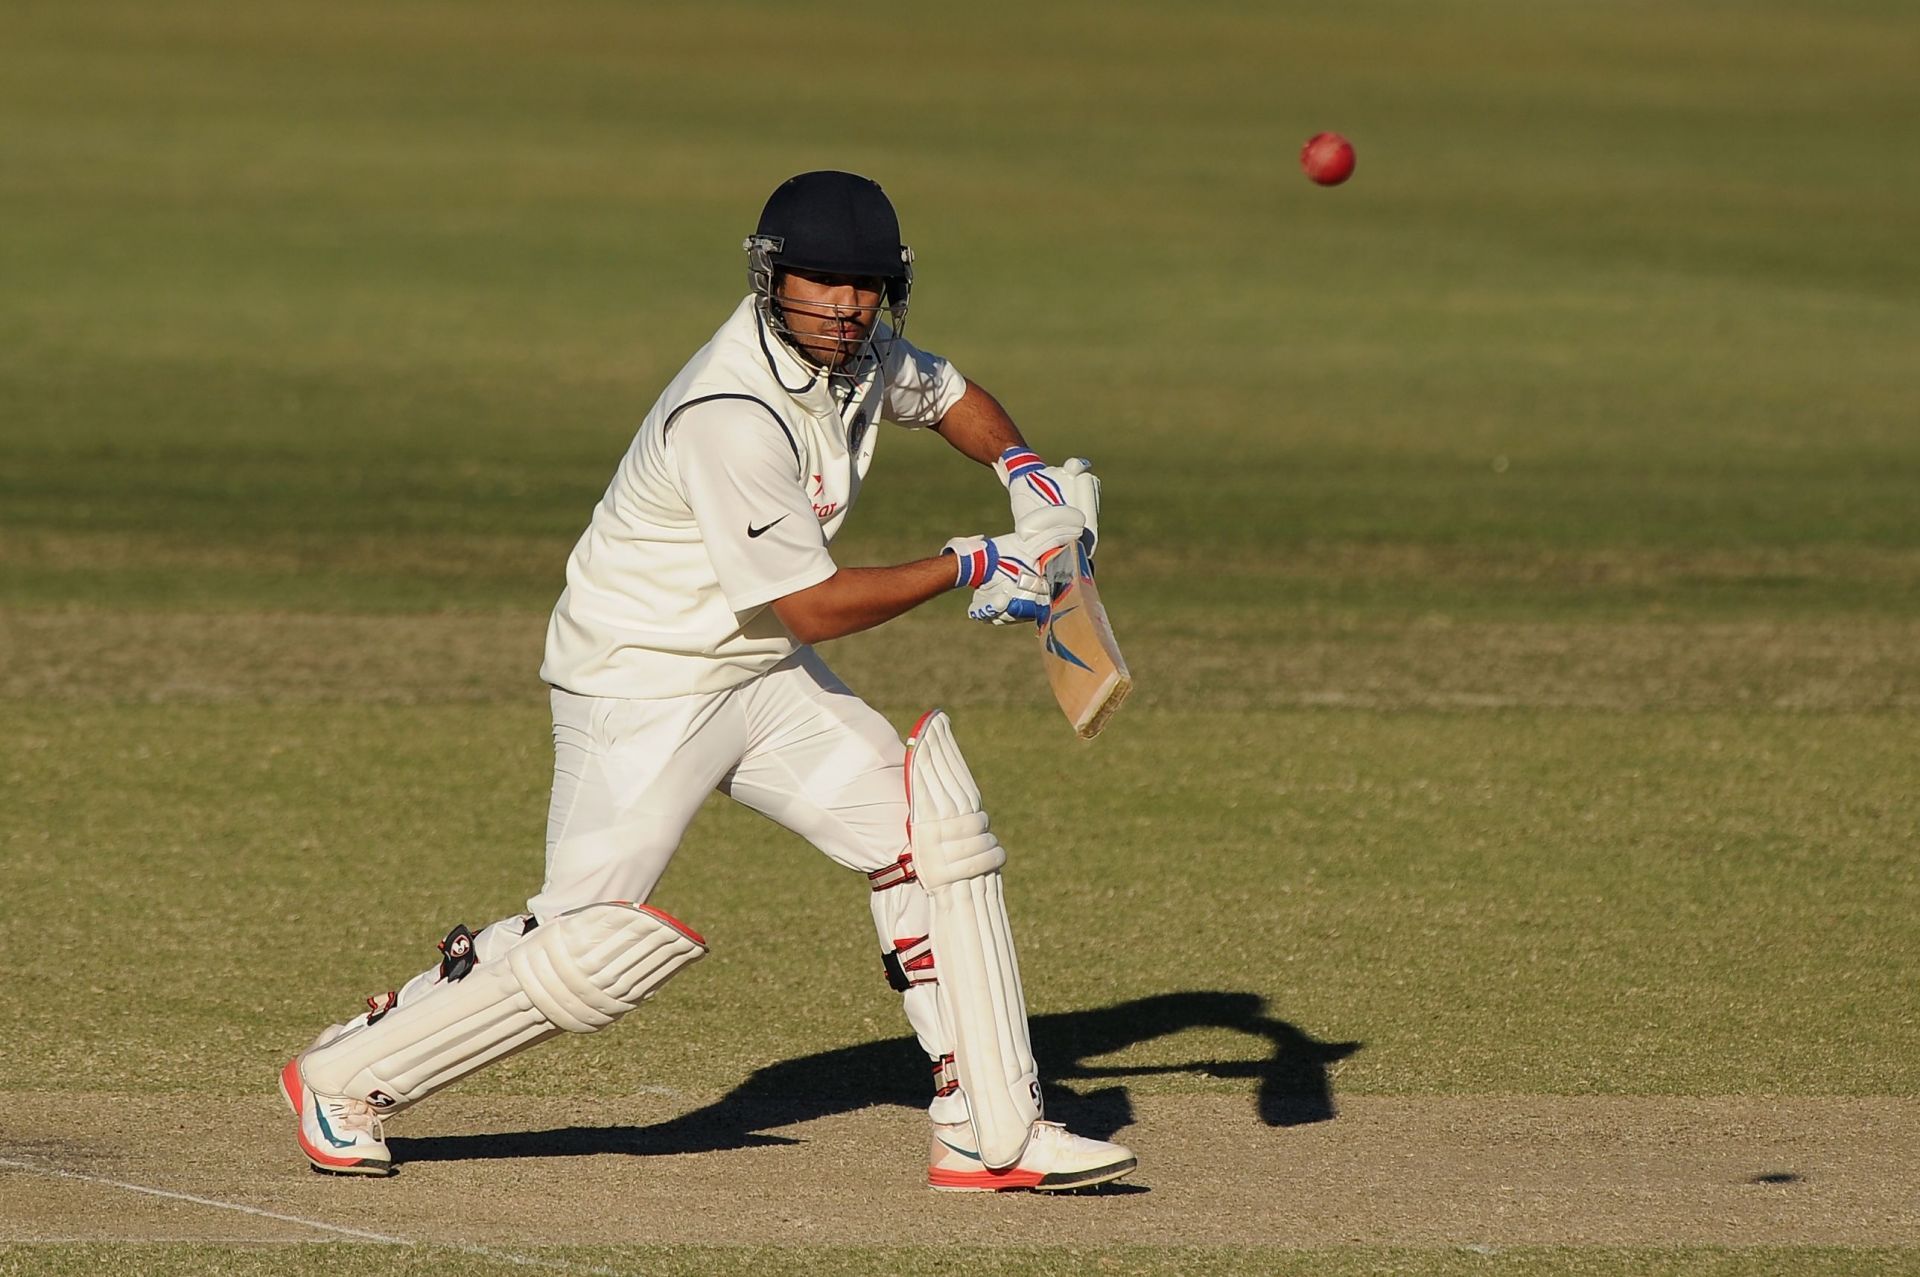 The 31-year-old has the experience of 85 first-class matches and 90 List-A games. (Pic: Getty Images)